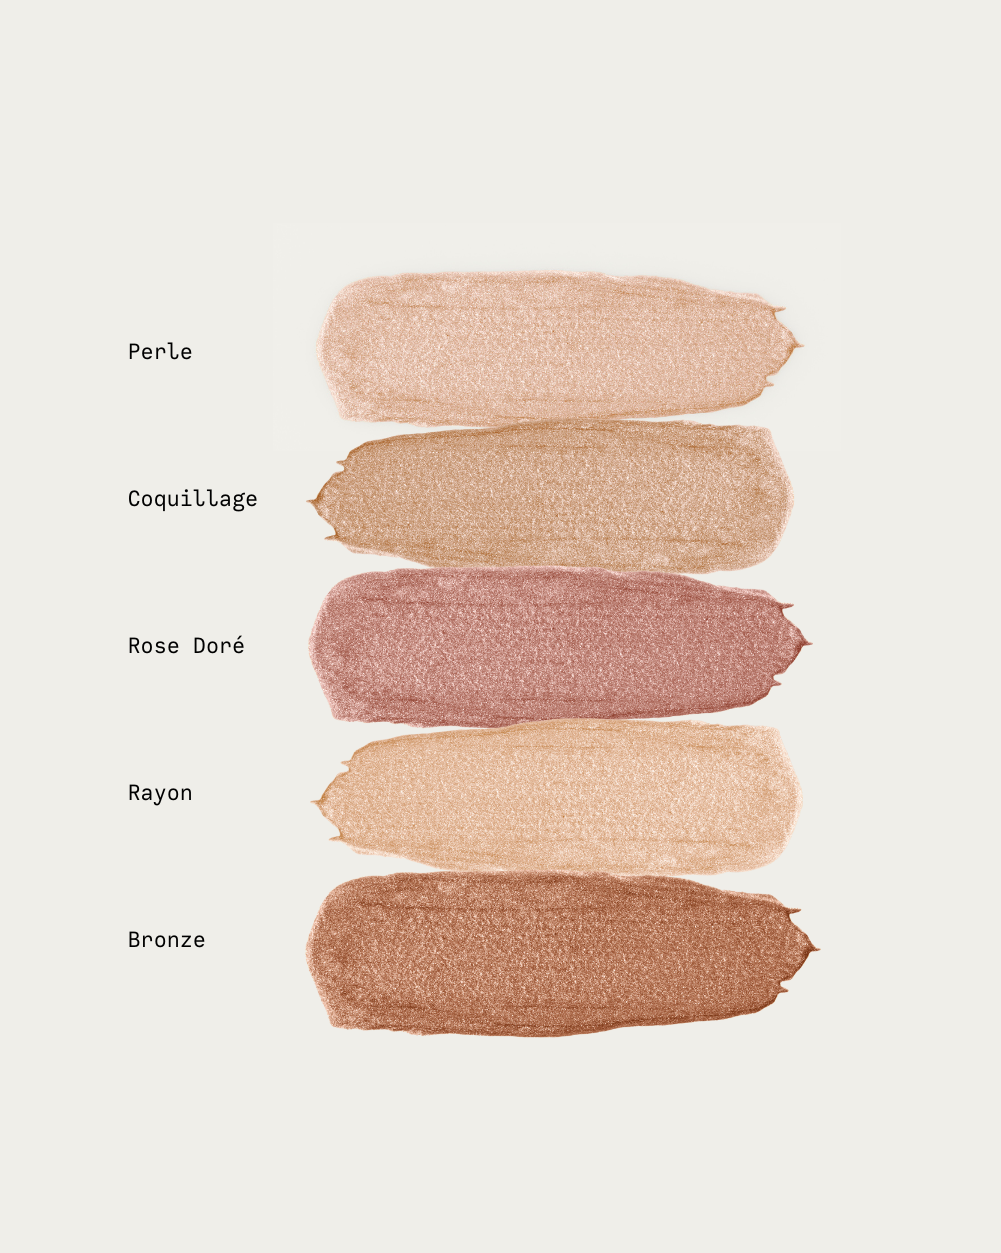 SWATCHES_13_82daf5ca-4084-4155-b99b-54fbbe2d071c.png